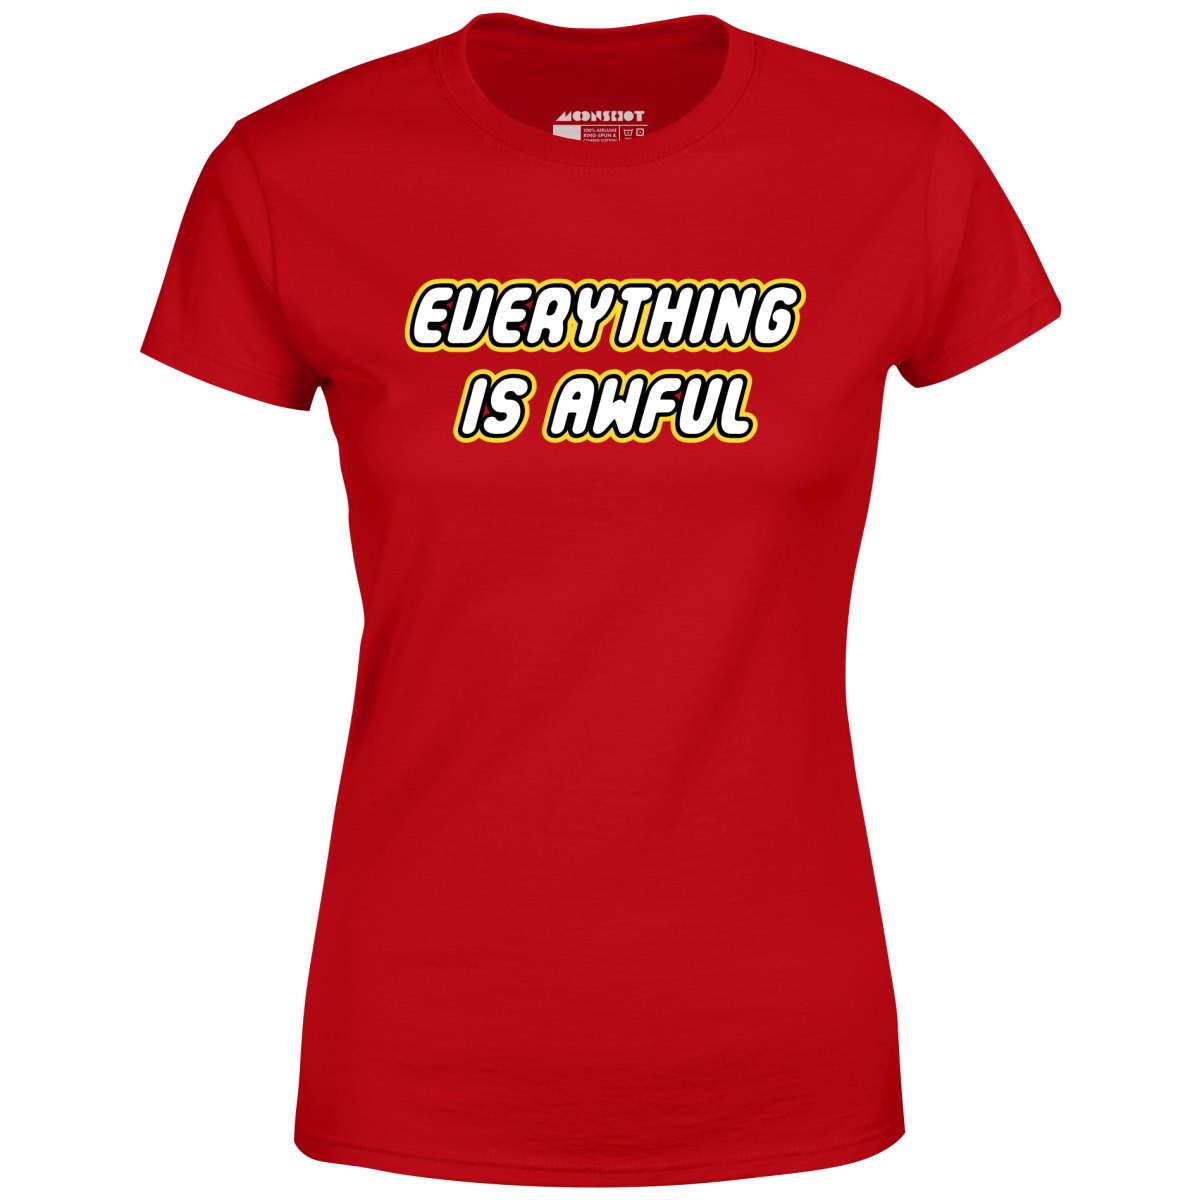 Everything is Awful - Women's T-Shirt